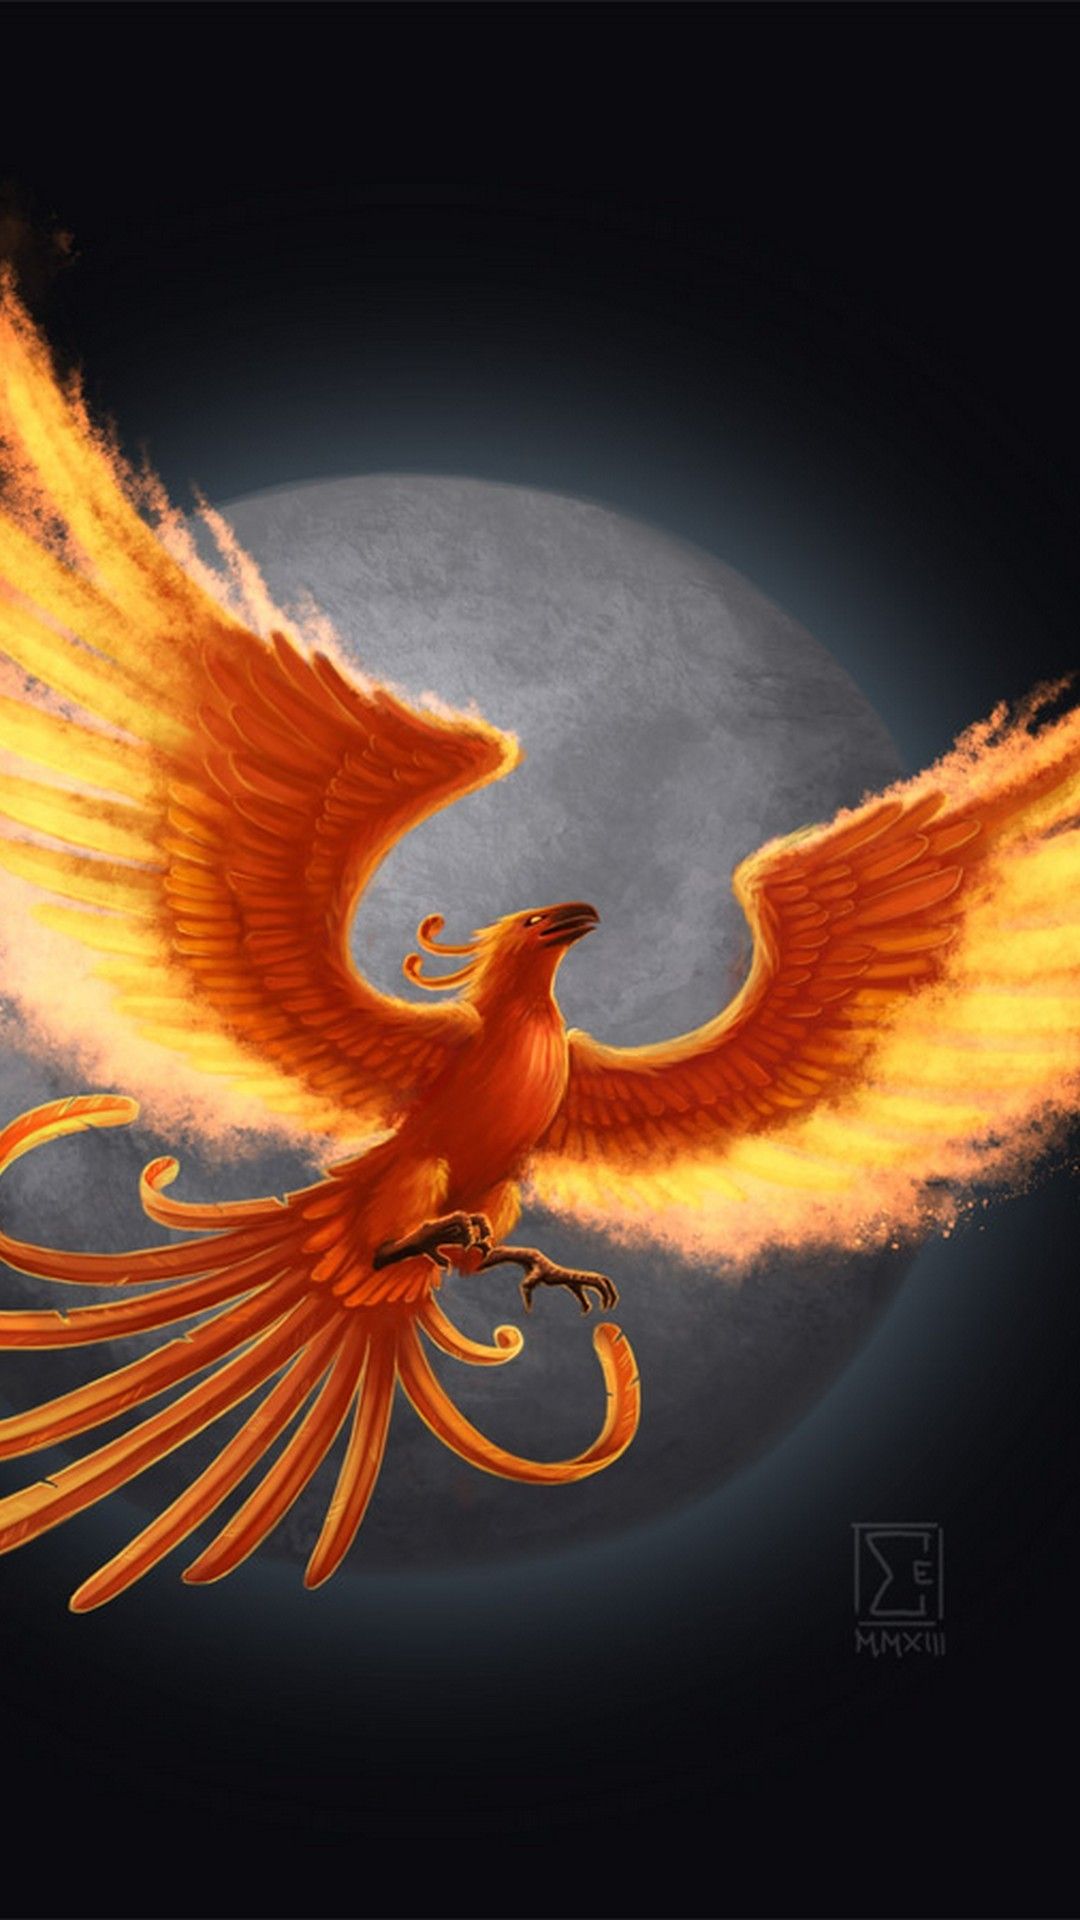 Mobile Wallpaper Phoenix Image With Image Resolution Mythical Creature Logo